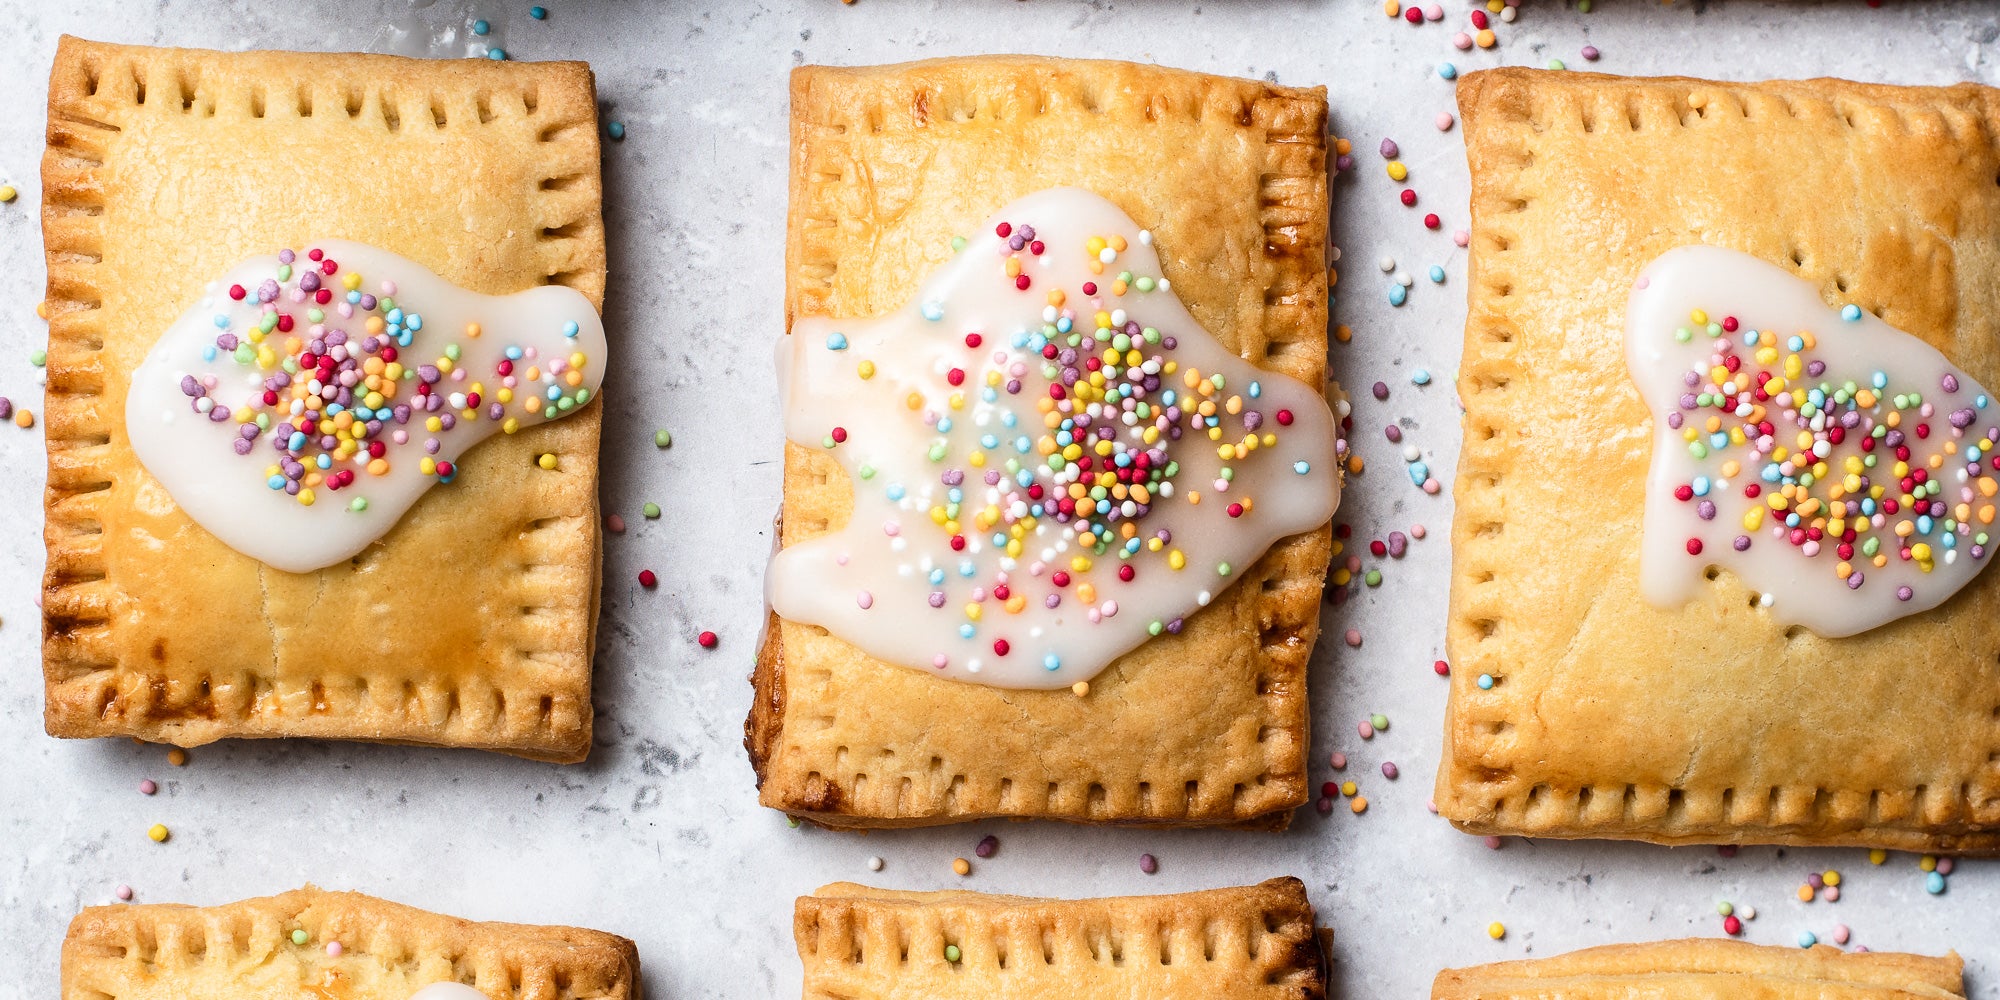 Overhead shot of  3 Pop Tarts with white icing and sprinkles.